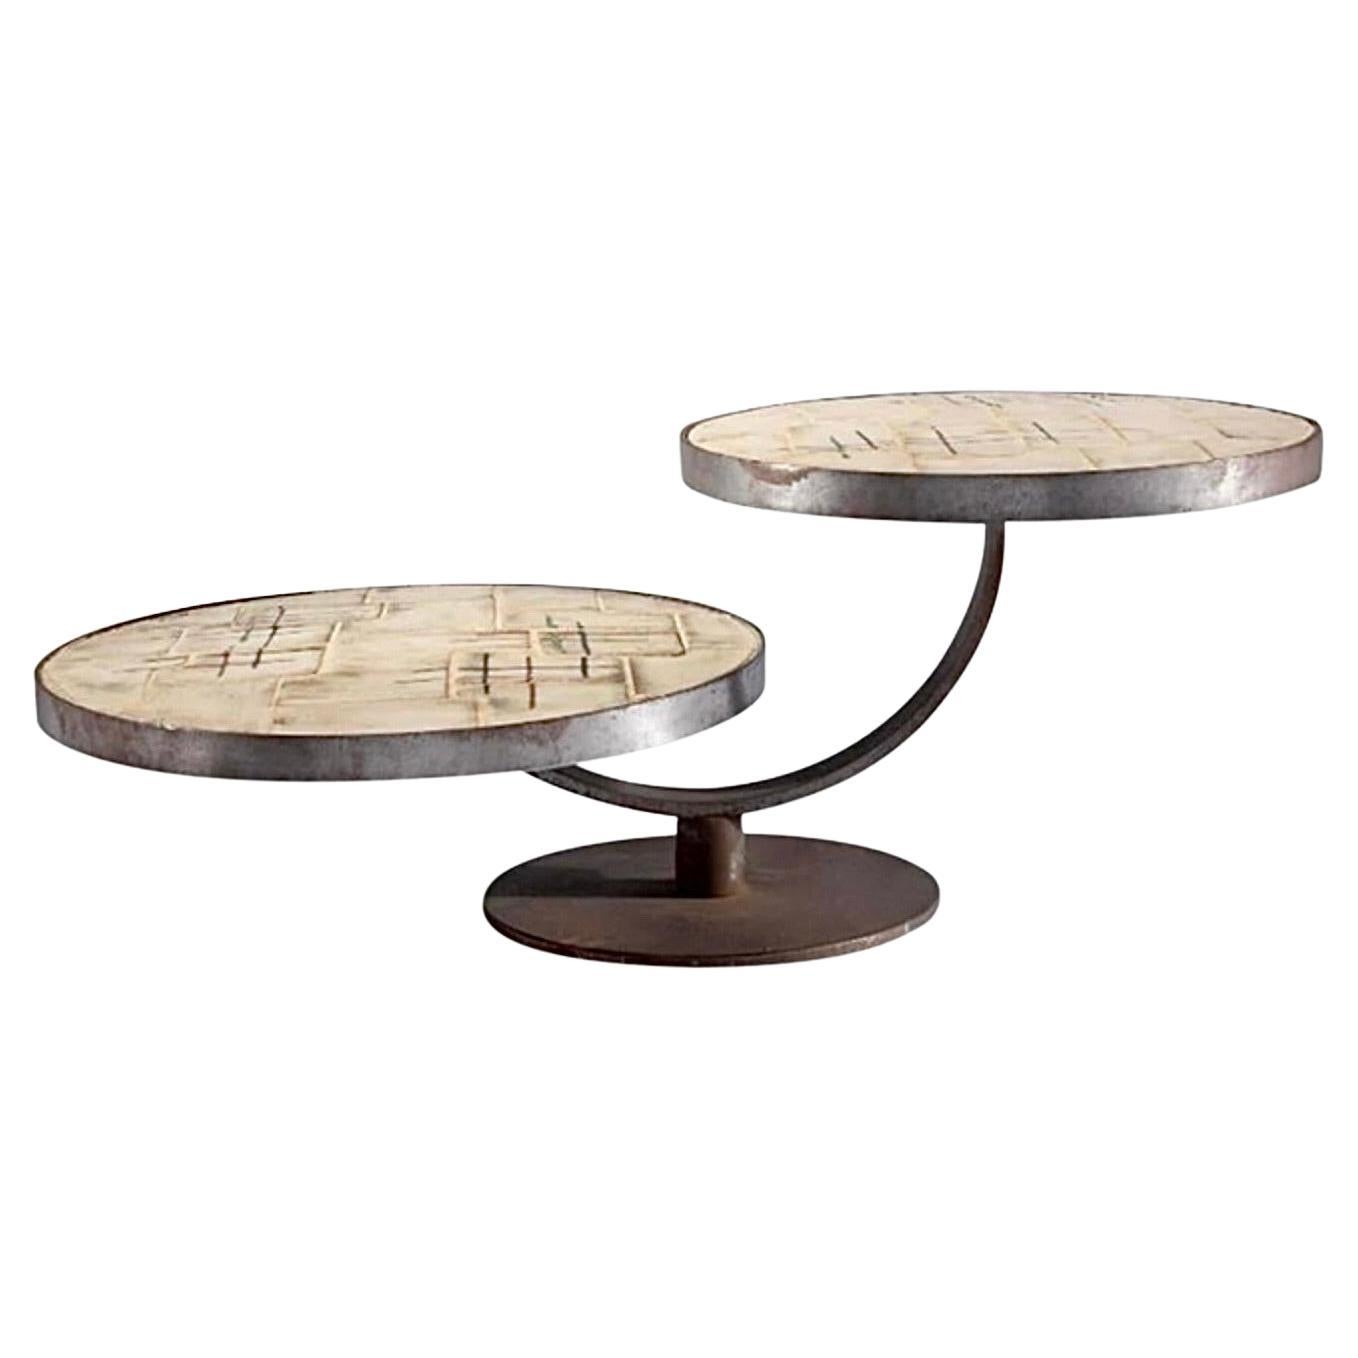 Vallauris France, Mid 20th Century Two-Tiered Coffee Table, signed Barrois